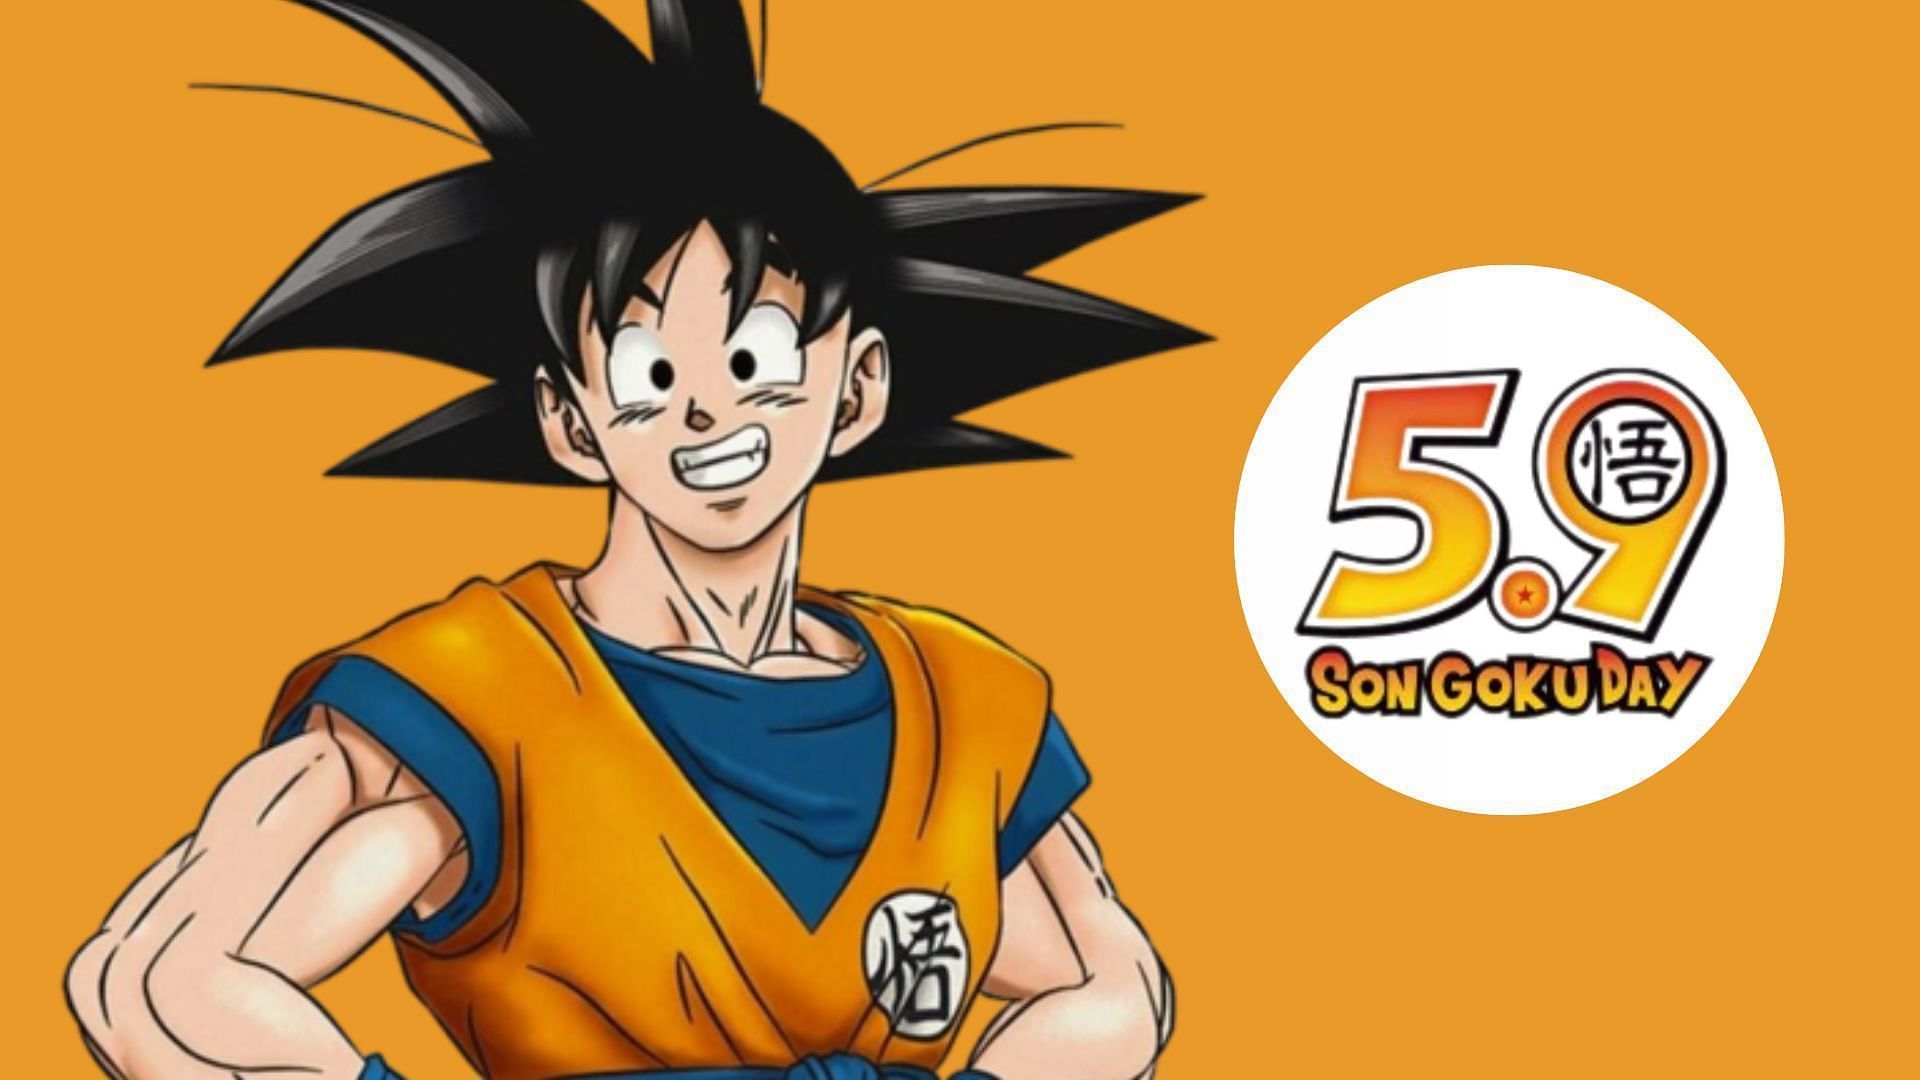 A new Dragon Ball series is officially on the way